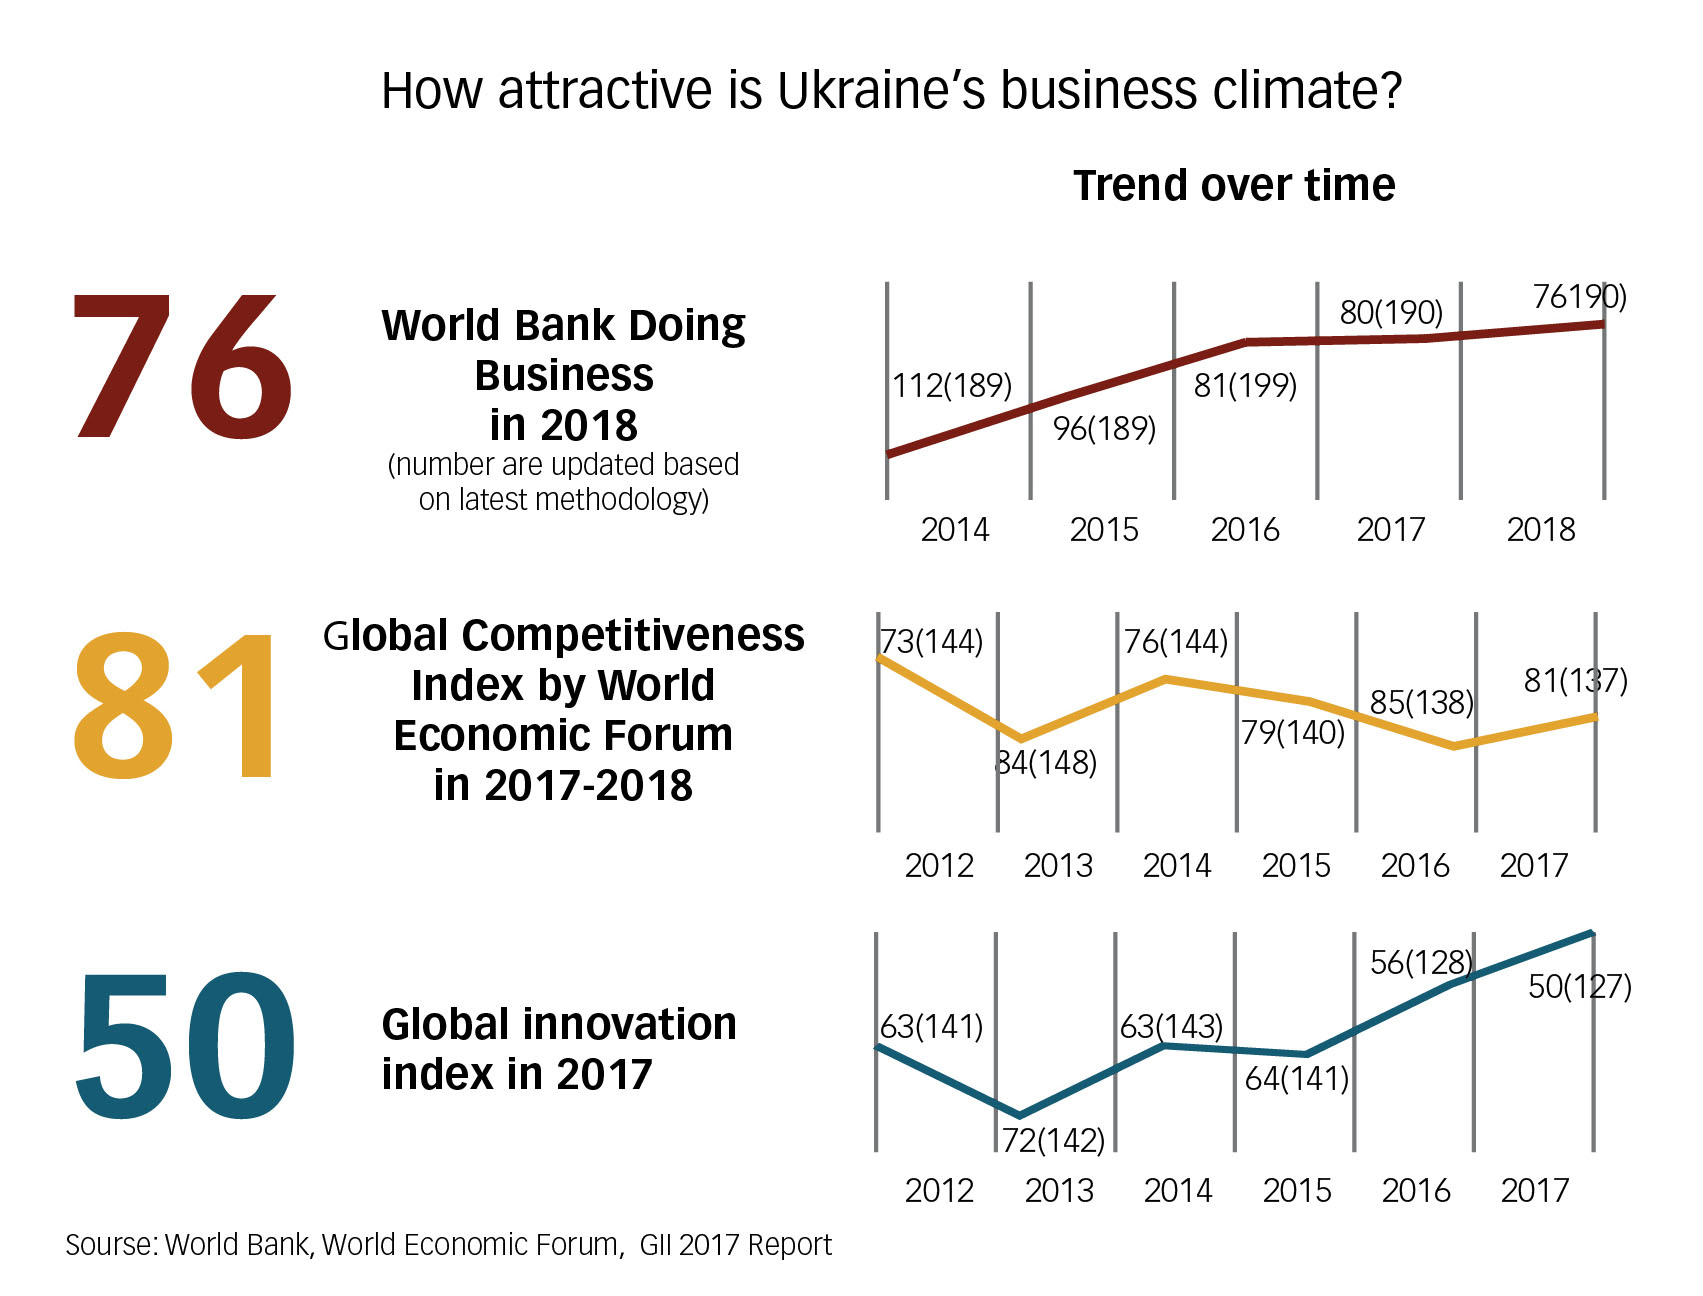 Ukraine's investment climate is not making huge leaps in the right direction. While showing steady improvement in the World Bank Doing Business ranking, the nation is slipping in the Global Competitiveness Index. Its best showing is in the Global Innovation Index. But Ukraine ranks 50th or below, making it difficult to attract the foreign direct investment that the nation needs.